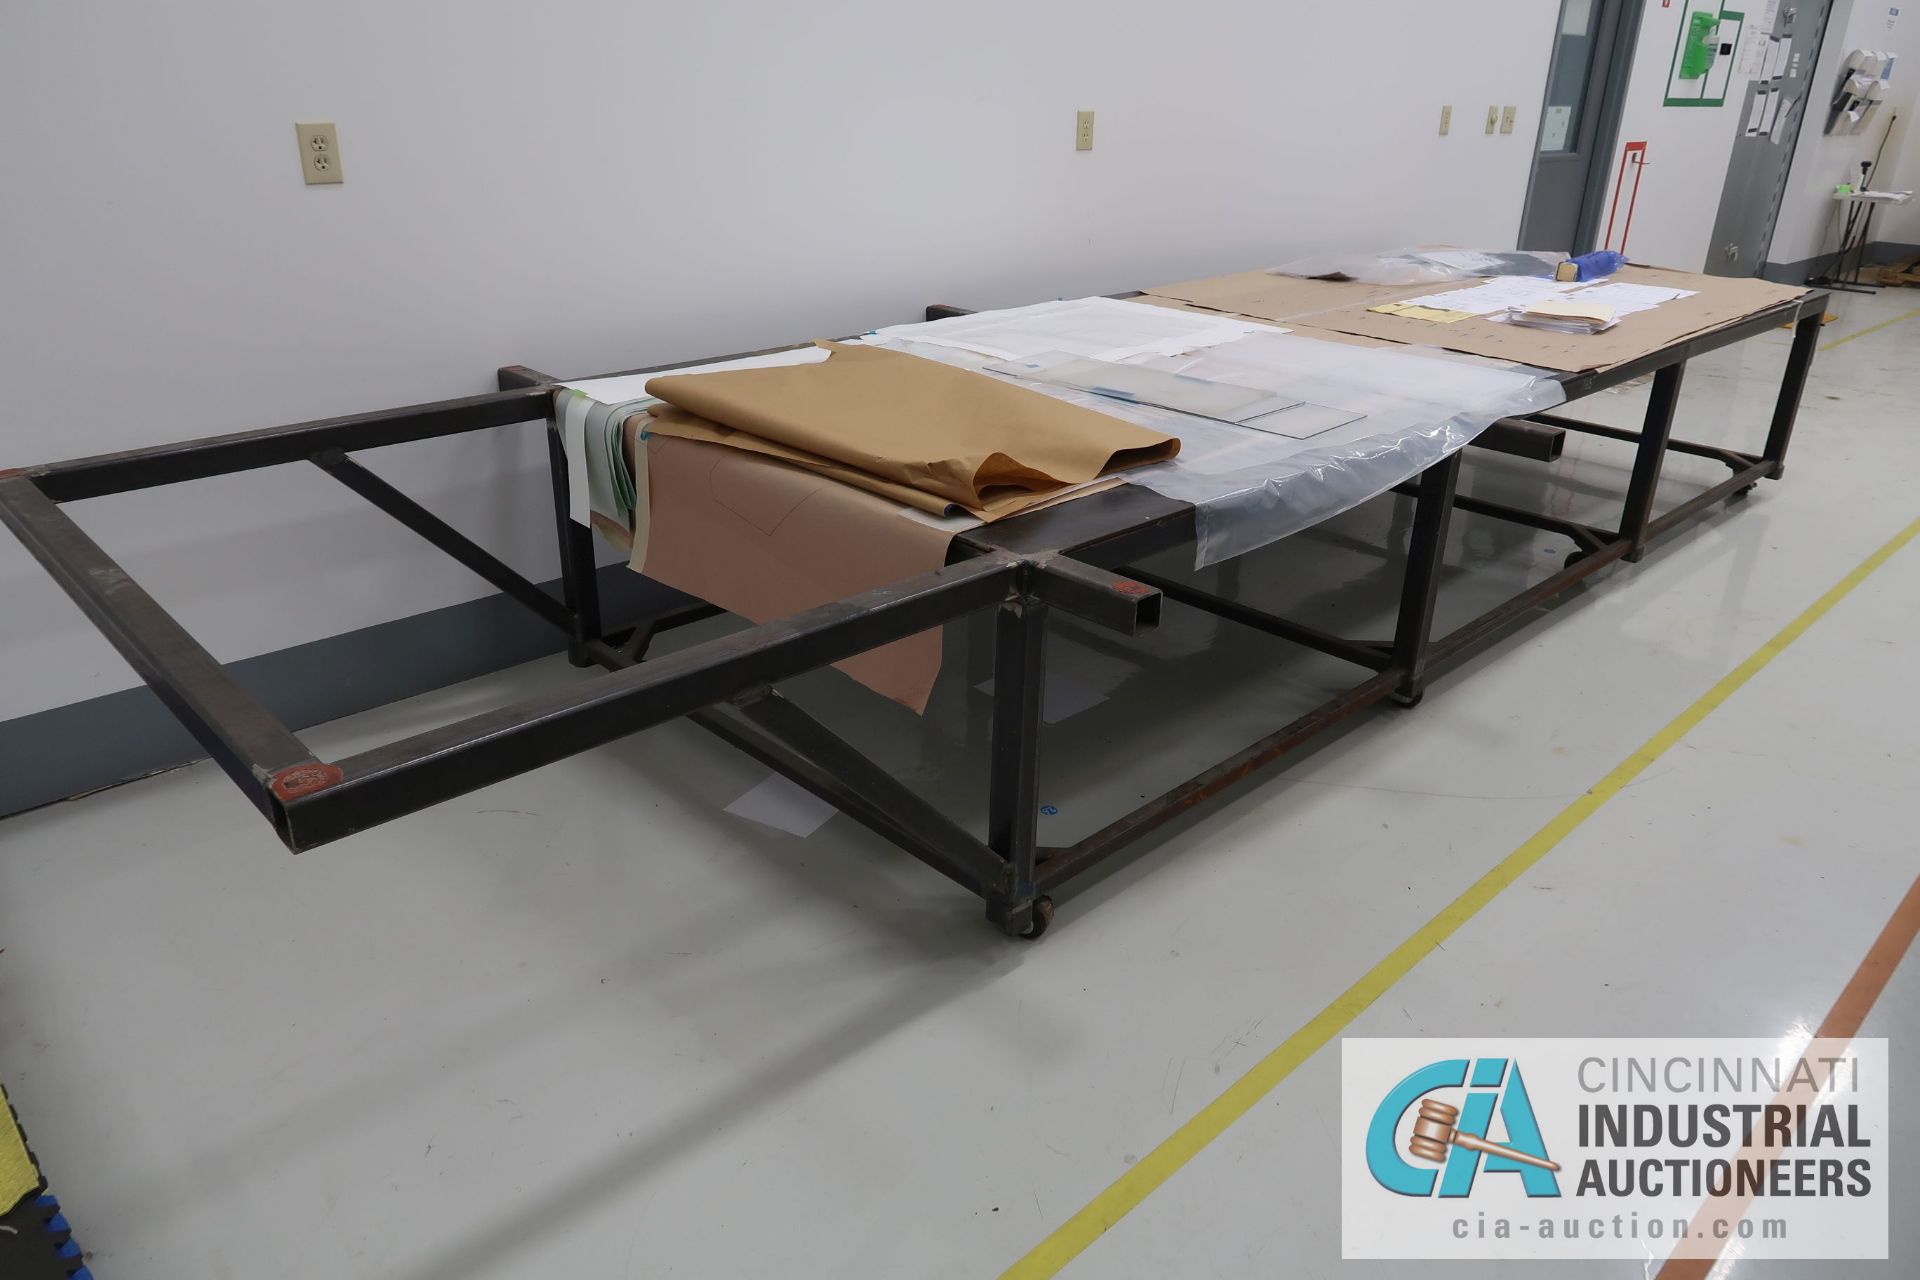 60.5" X 211" X 30.5" PORTABLE STEEL WORK BENCH - Image 2 of 2